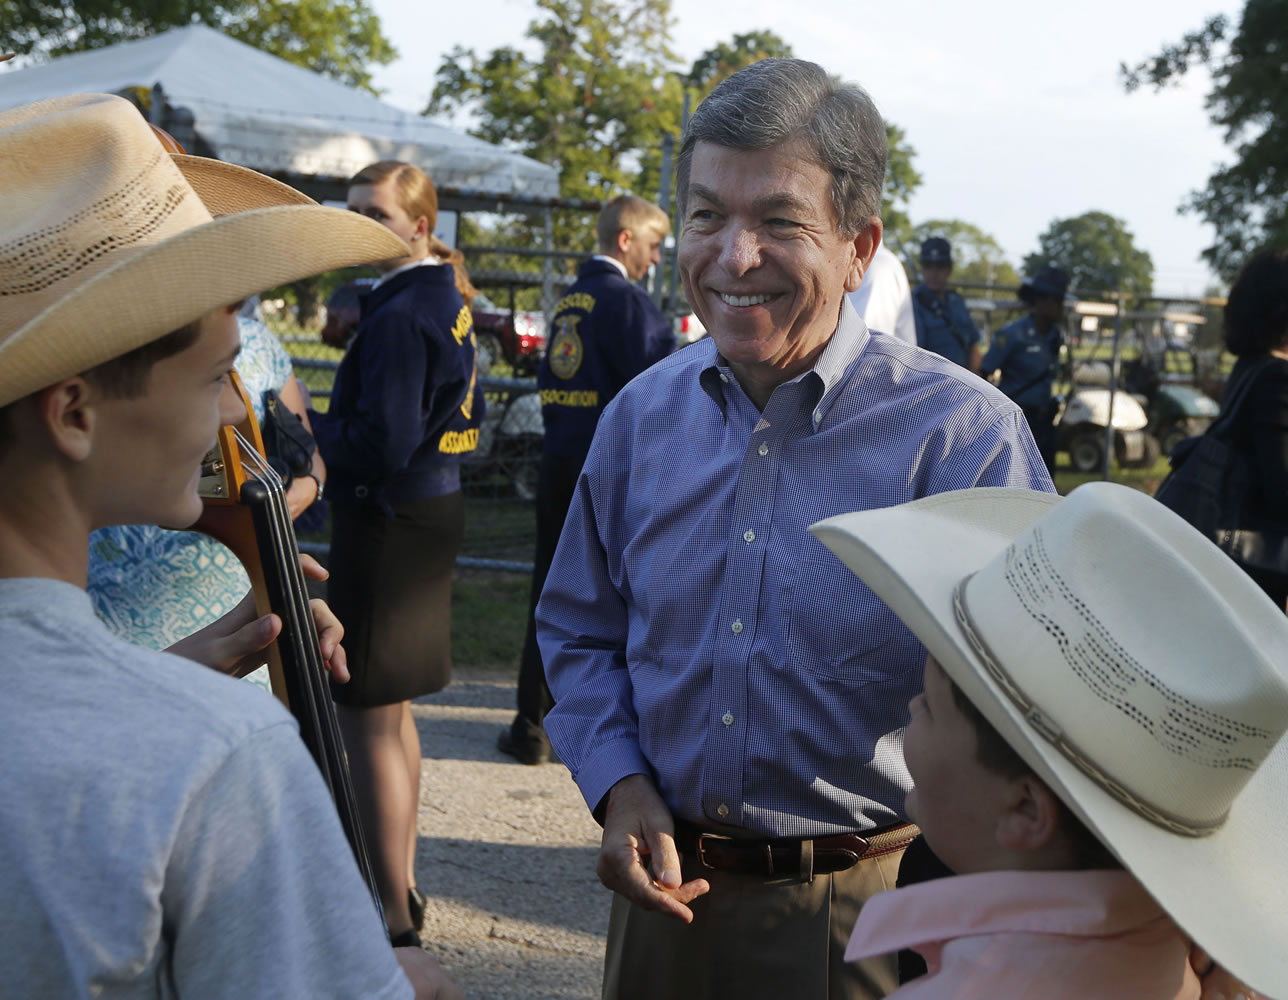 Sen. Roy Blunt, R-Mo., center, greets Trustin Baker, left, and Elijah Baker while attending the Governor's Ham Breakfast at the Missouri State Fair in Sedalia, Mo., on Aug.